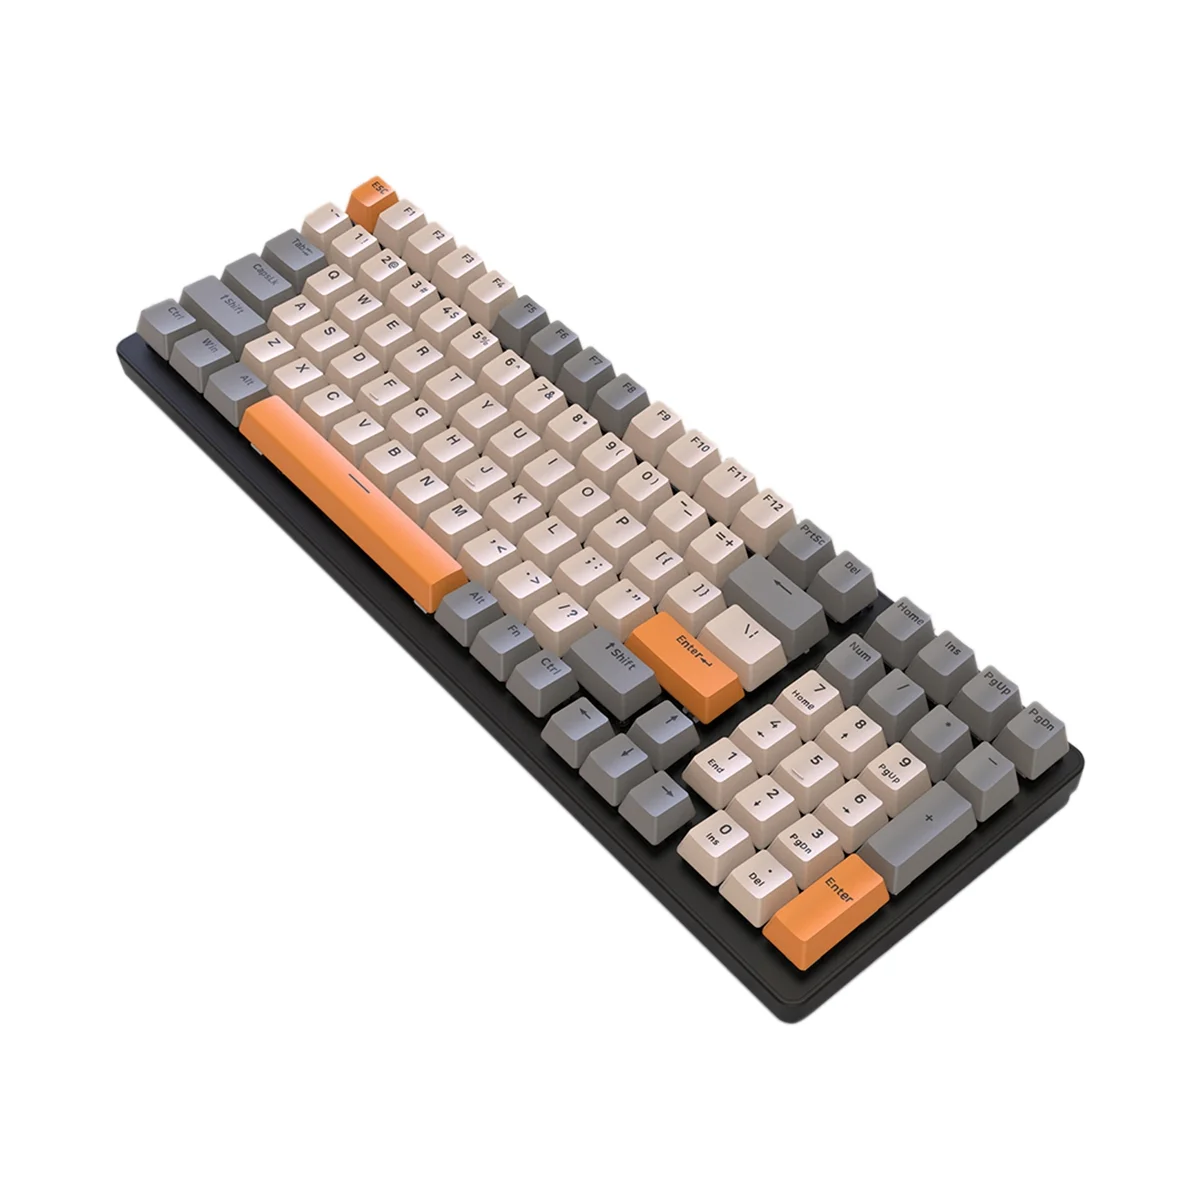 

ZIYOU LANG K6 Mechanical Keyboard 100 Keys Keycaps BT5.0 2.4 Ghz Wired Three Modes for Gaming Computer